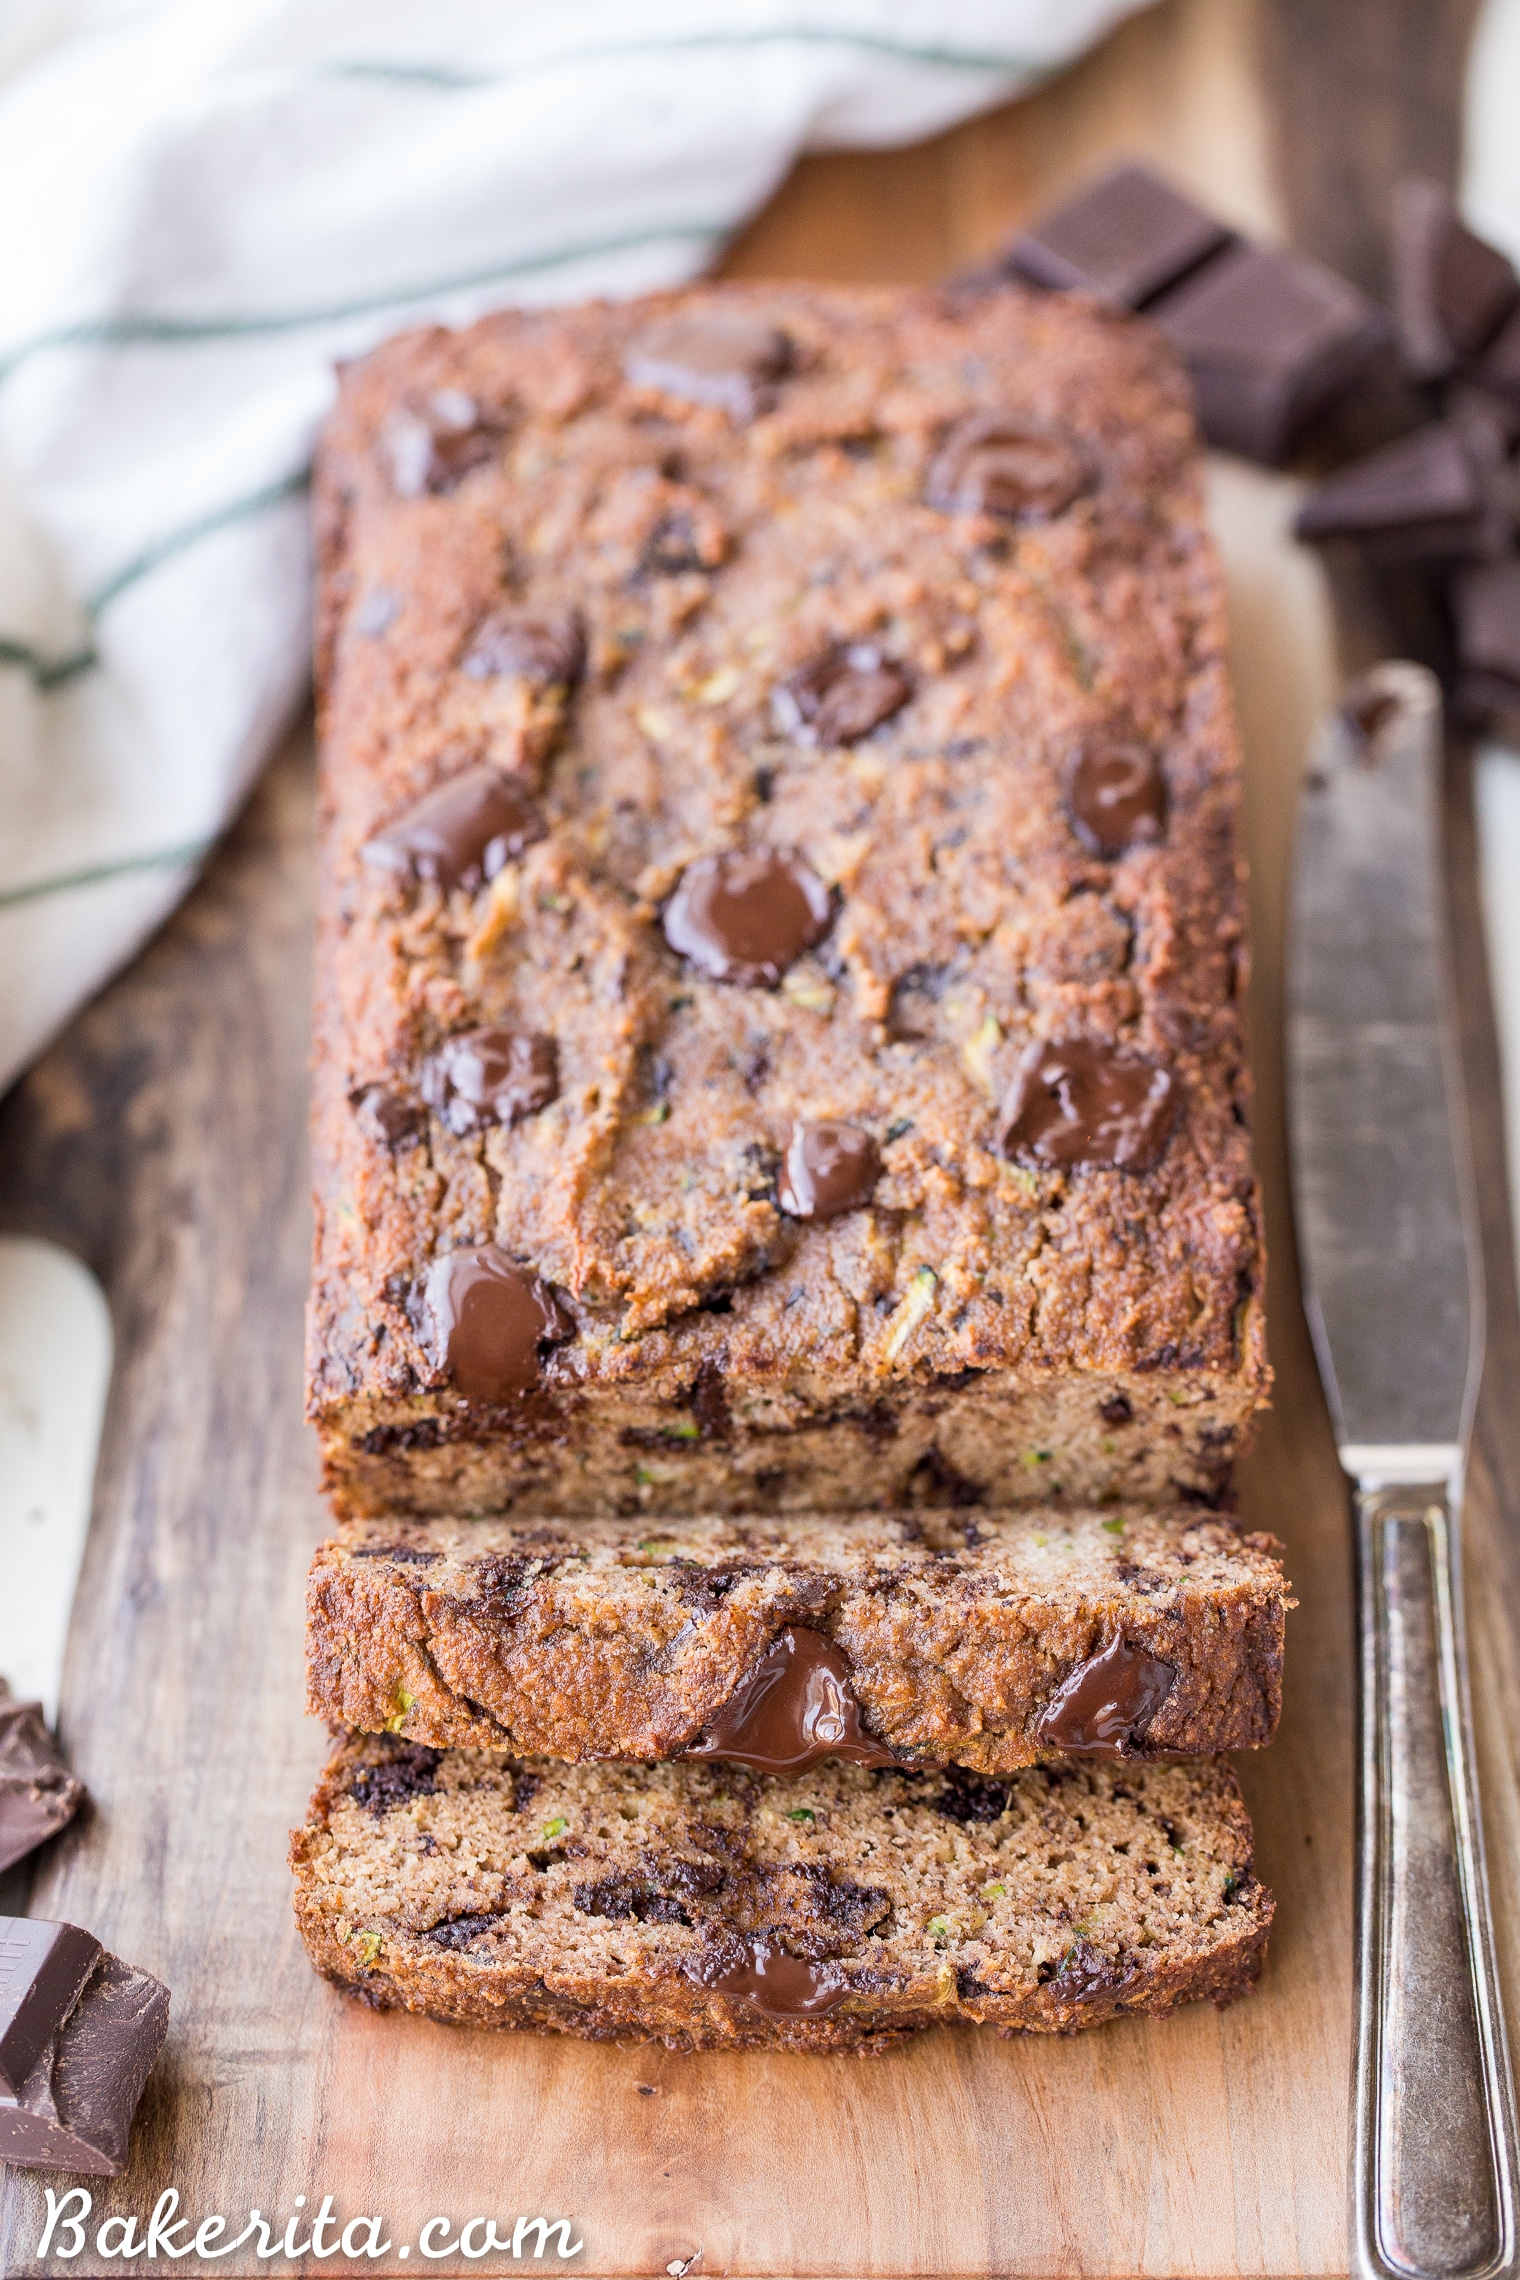 This Chocolate Chunk Zucchini Bread is soft and moist with a tender crumb, and it's not too sweet. This quick bread is Paleo friendly, gluten-free, grain-free, and refined sugar-free.